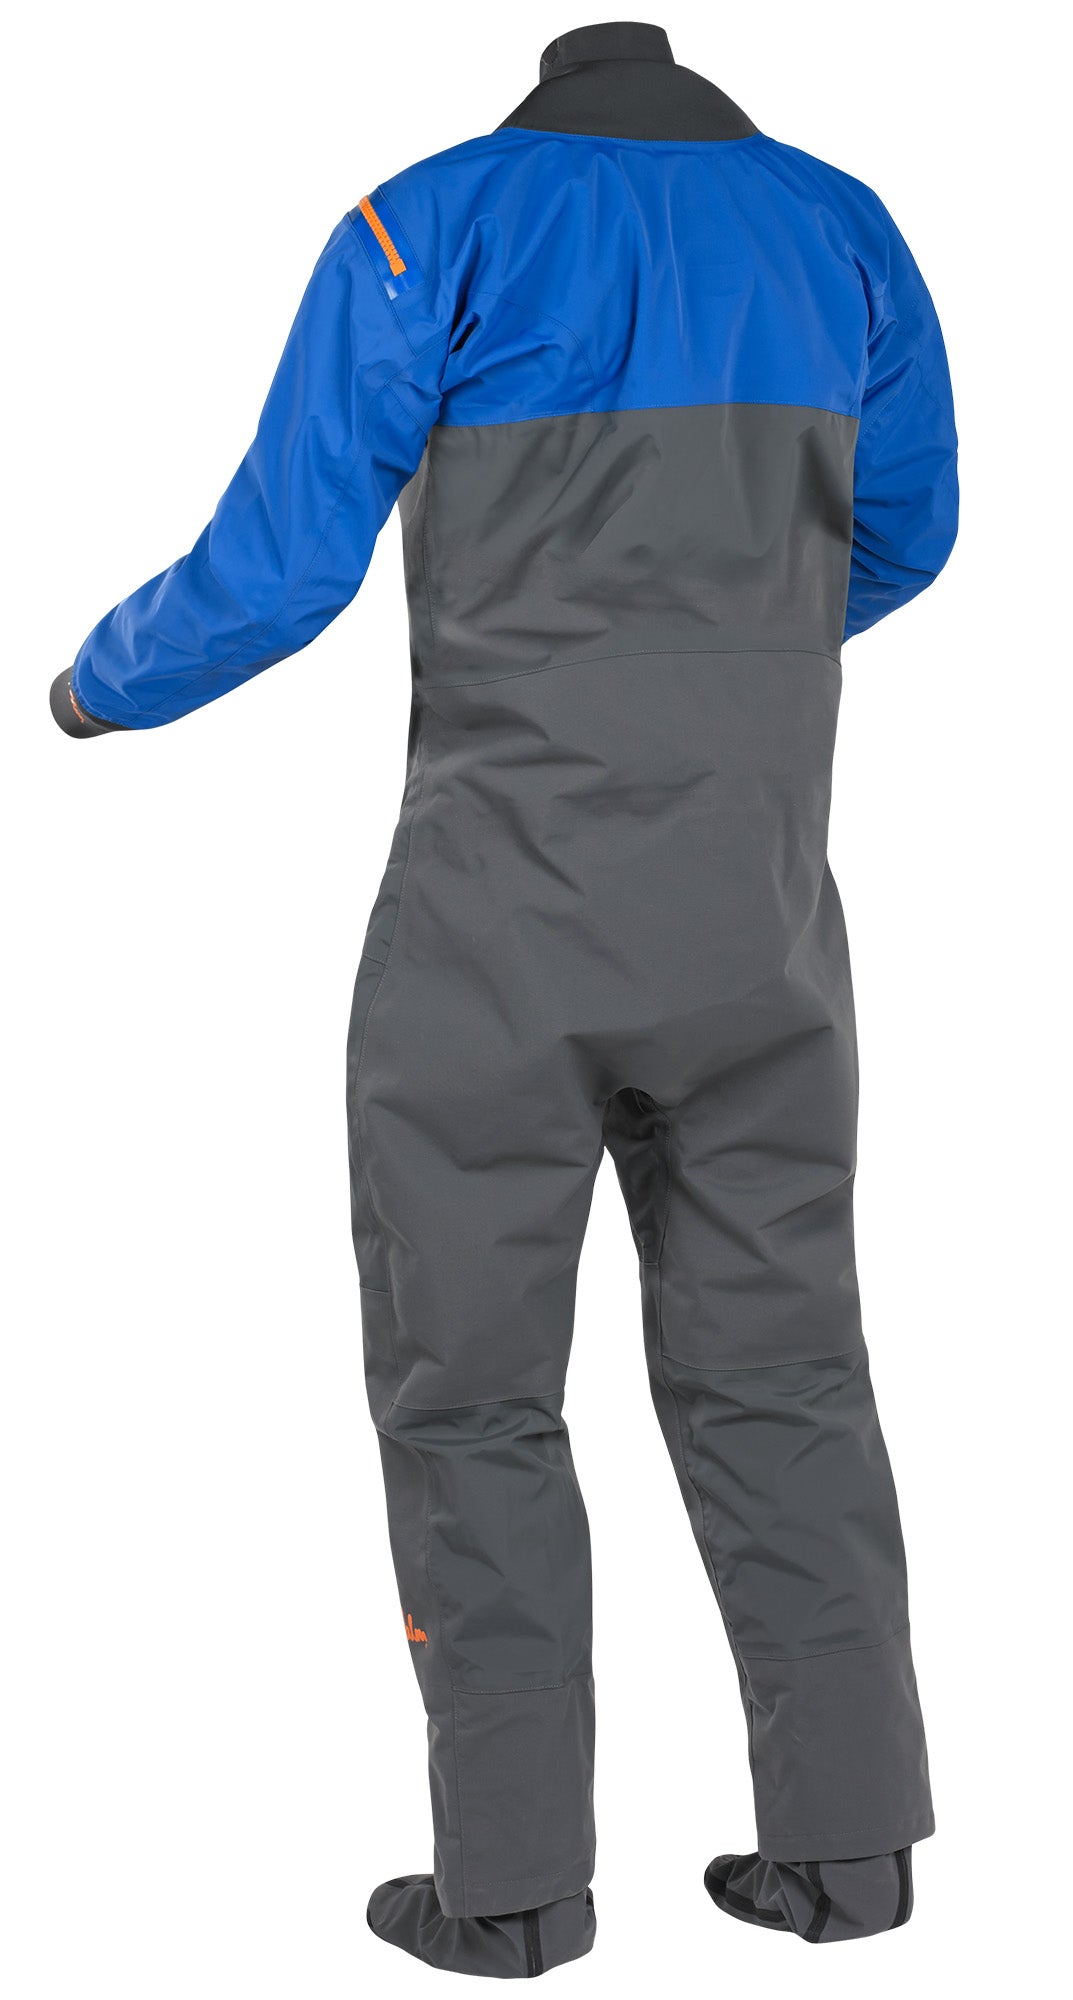 Rear view of the Palm Rogen Drysuit